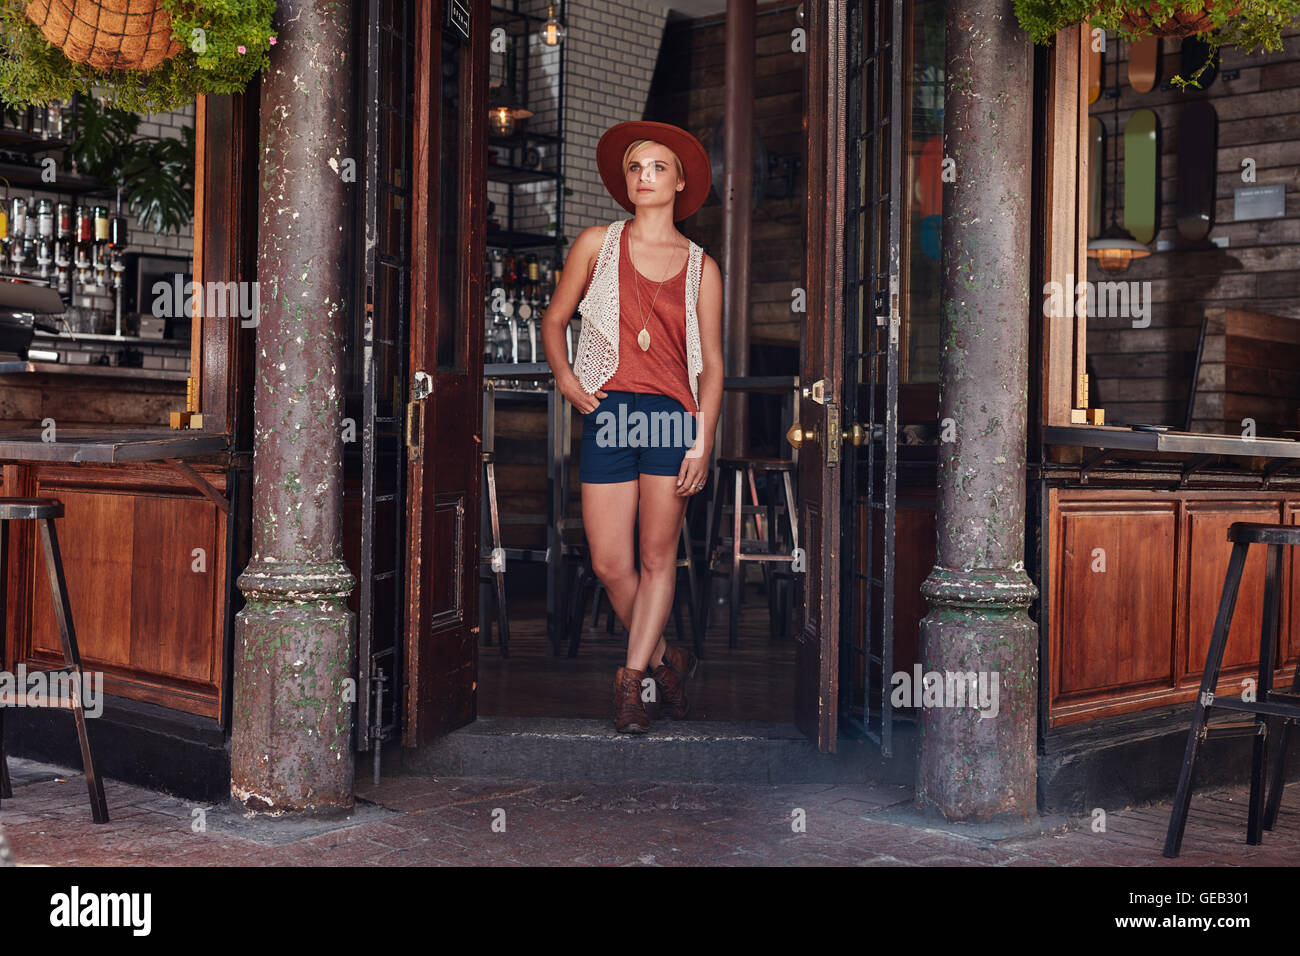 Full length portrait of trendy young woman leaving coffee shop. Stylish young woman walking out of a cafe. Stock Photo